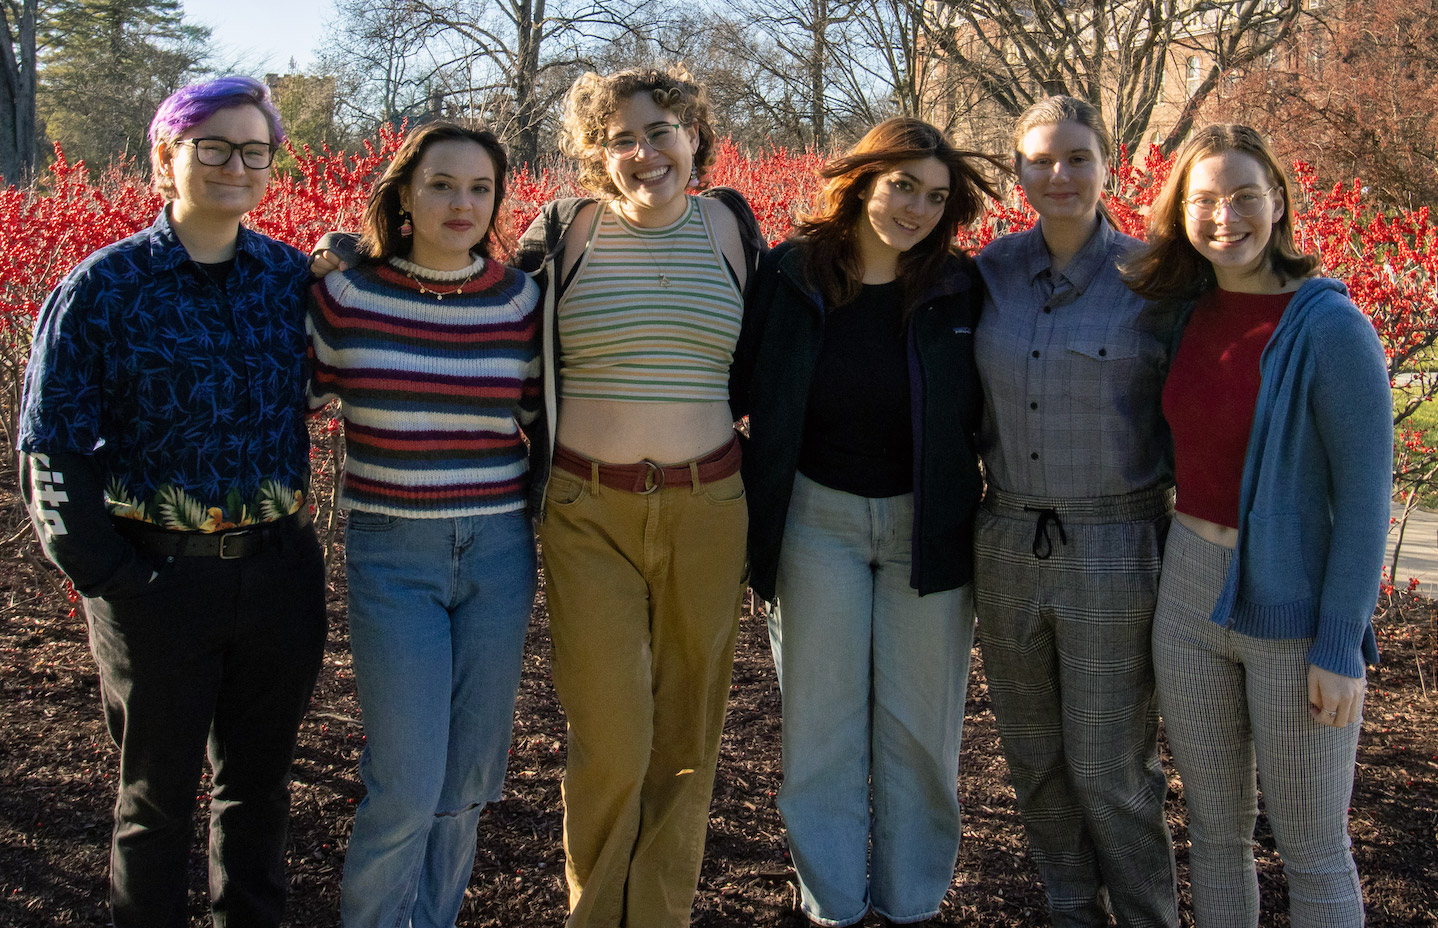 The Drama Majors Committee 2022/2023 - 6 students standing on campus in front of flowering bushes.